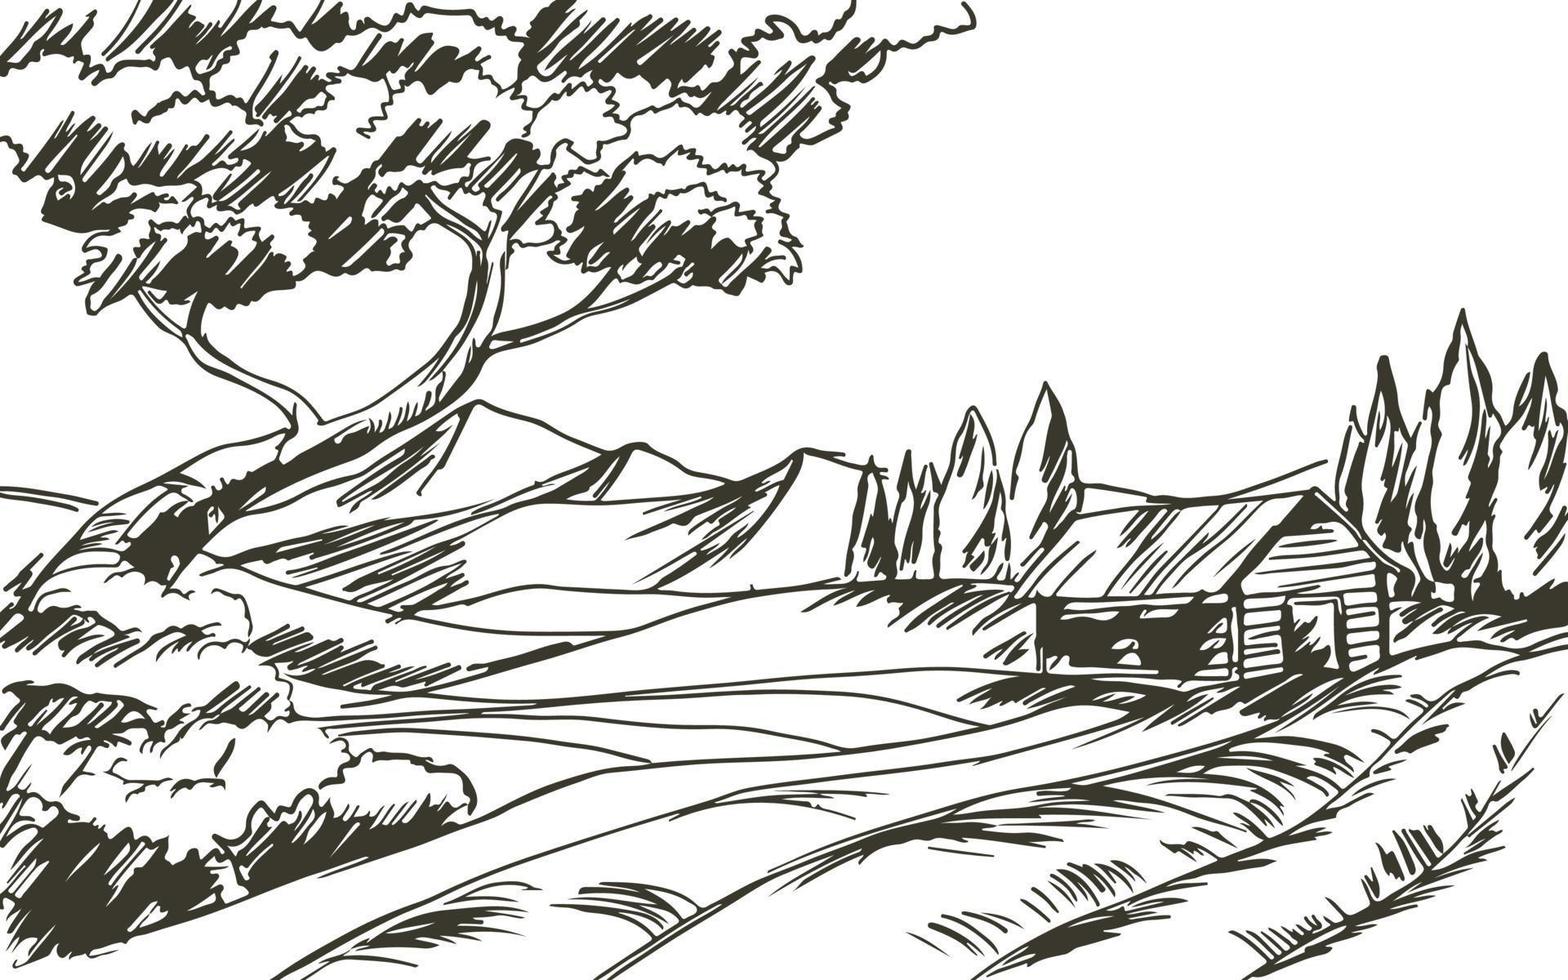 Rural landscape with barn black and white sketch art vector